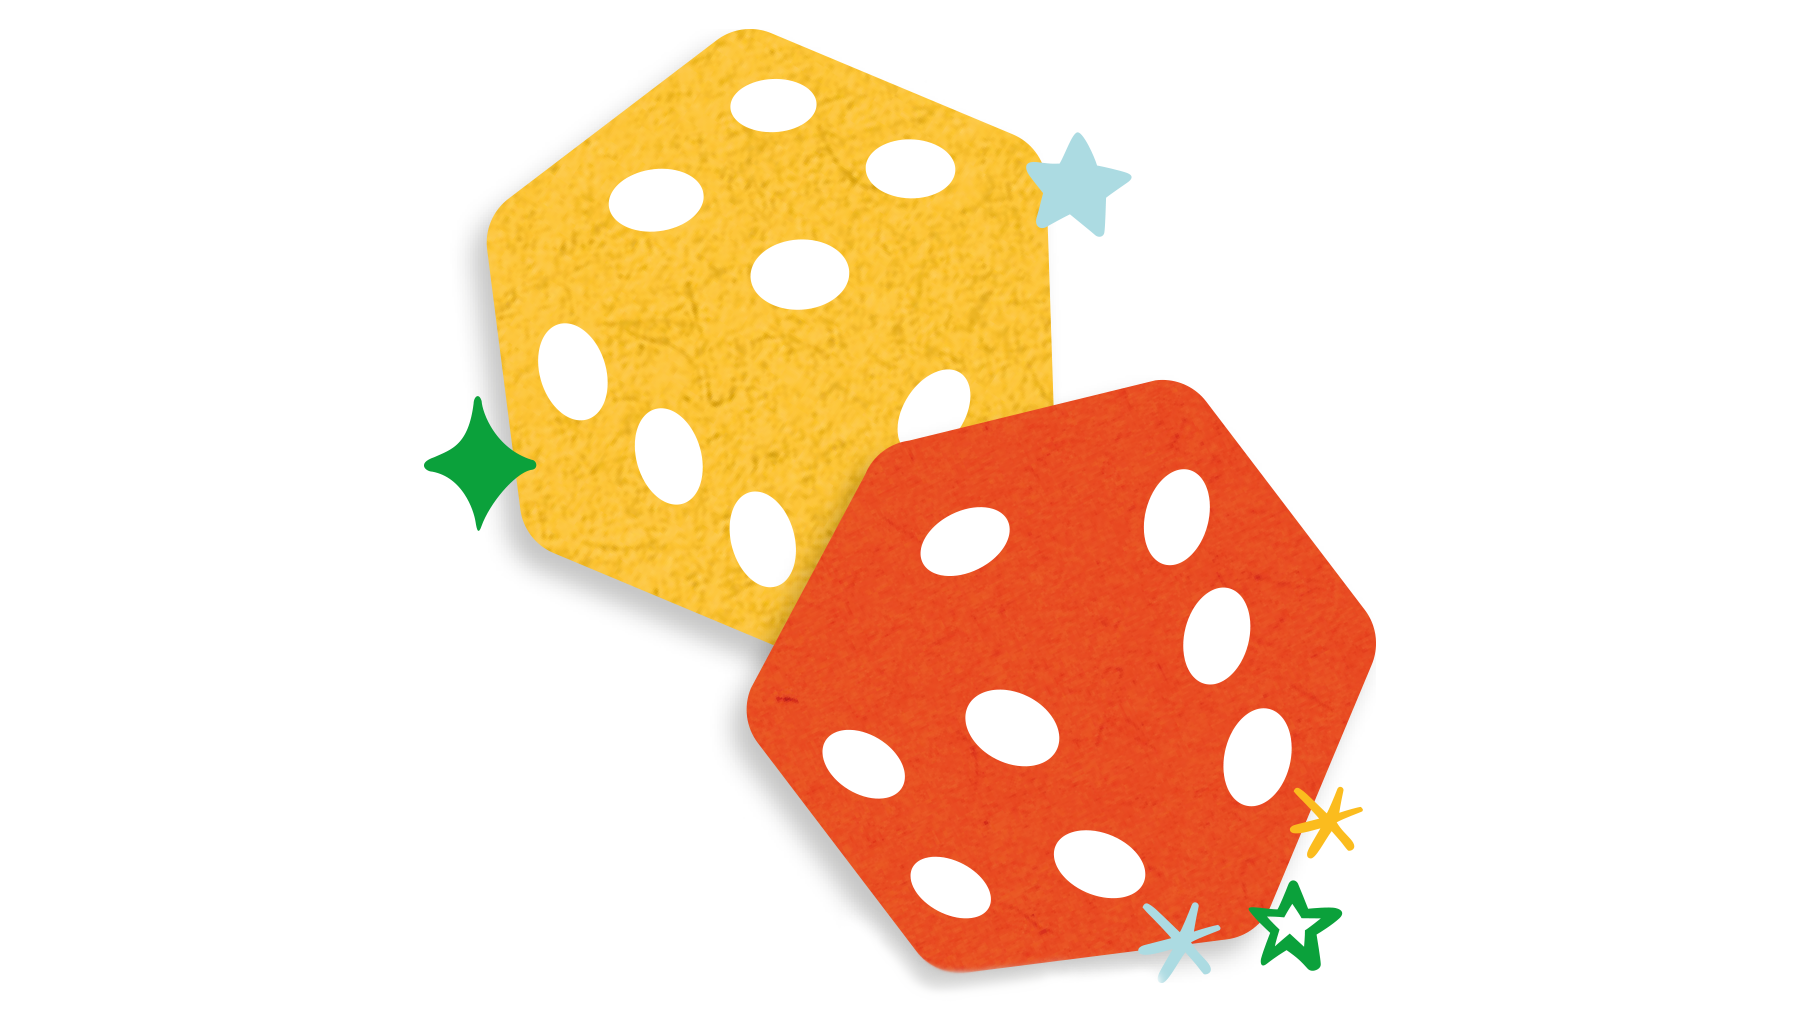 NSPCC_LFS_AS2_Illo_Dice.png